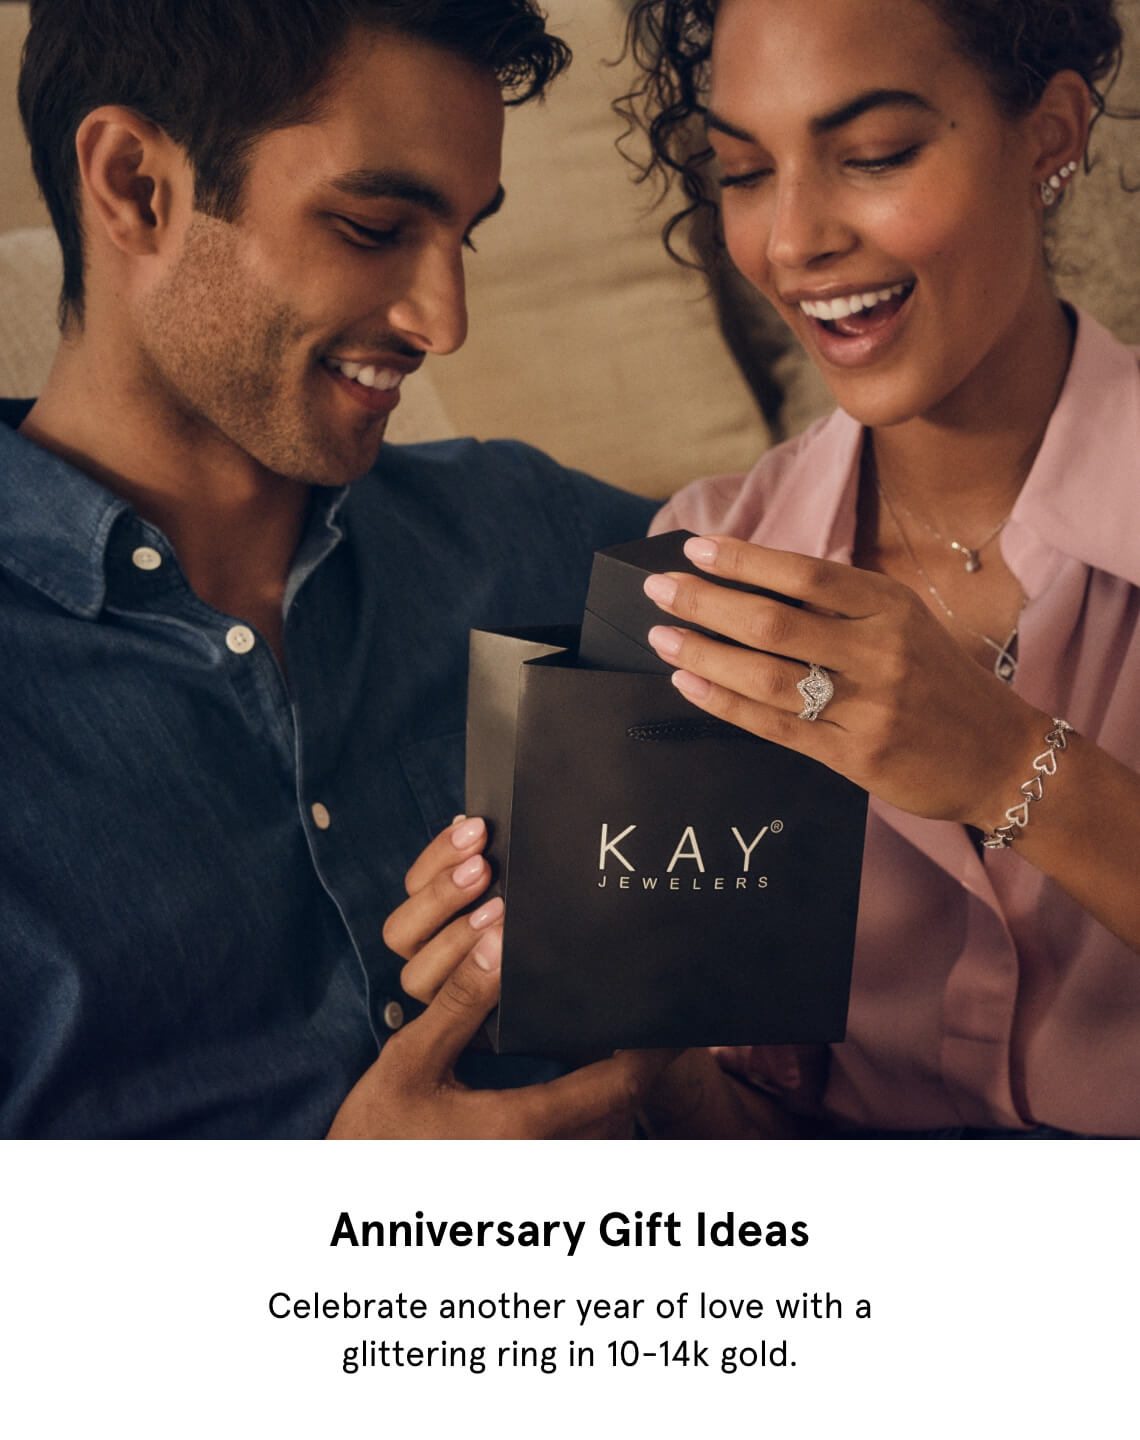 Anniversary Gift Ideas | Image of man holding a KAY gift bag as he gives it to smiling woman